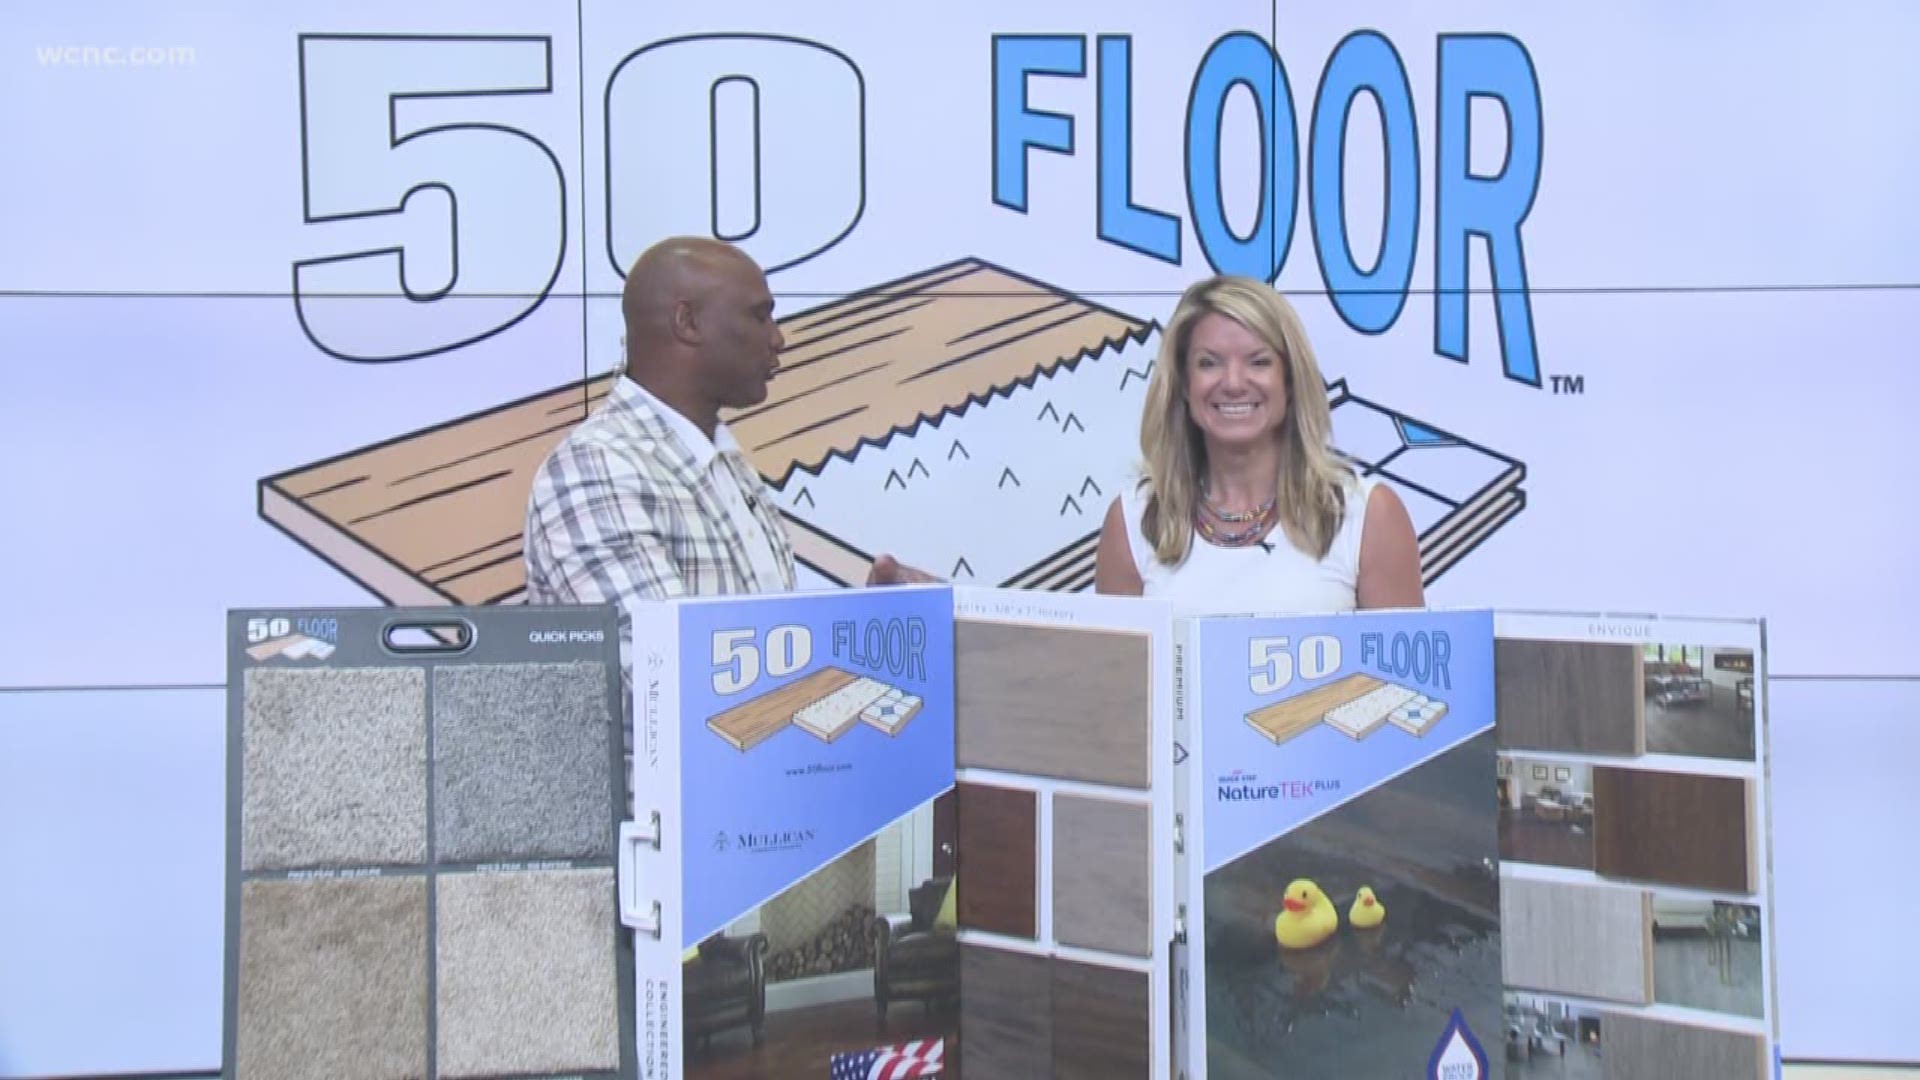 50 Floor does all the work so you can get beautiful new floors installed in one day for a great price.